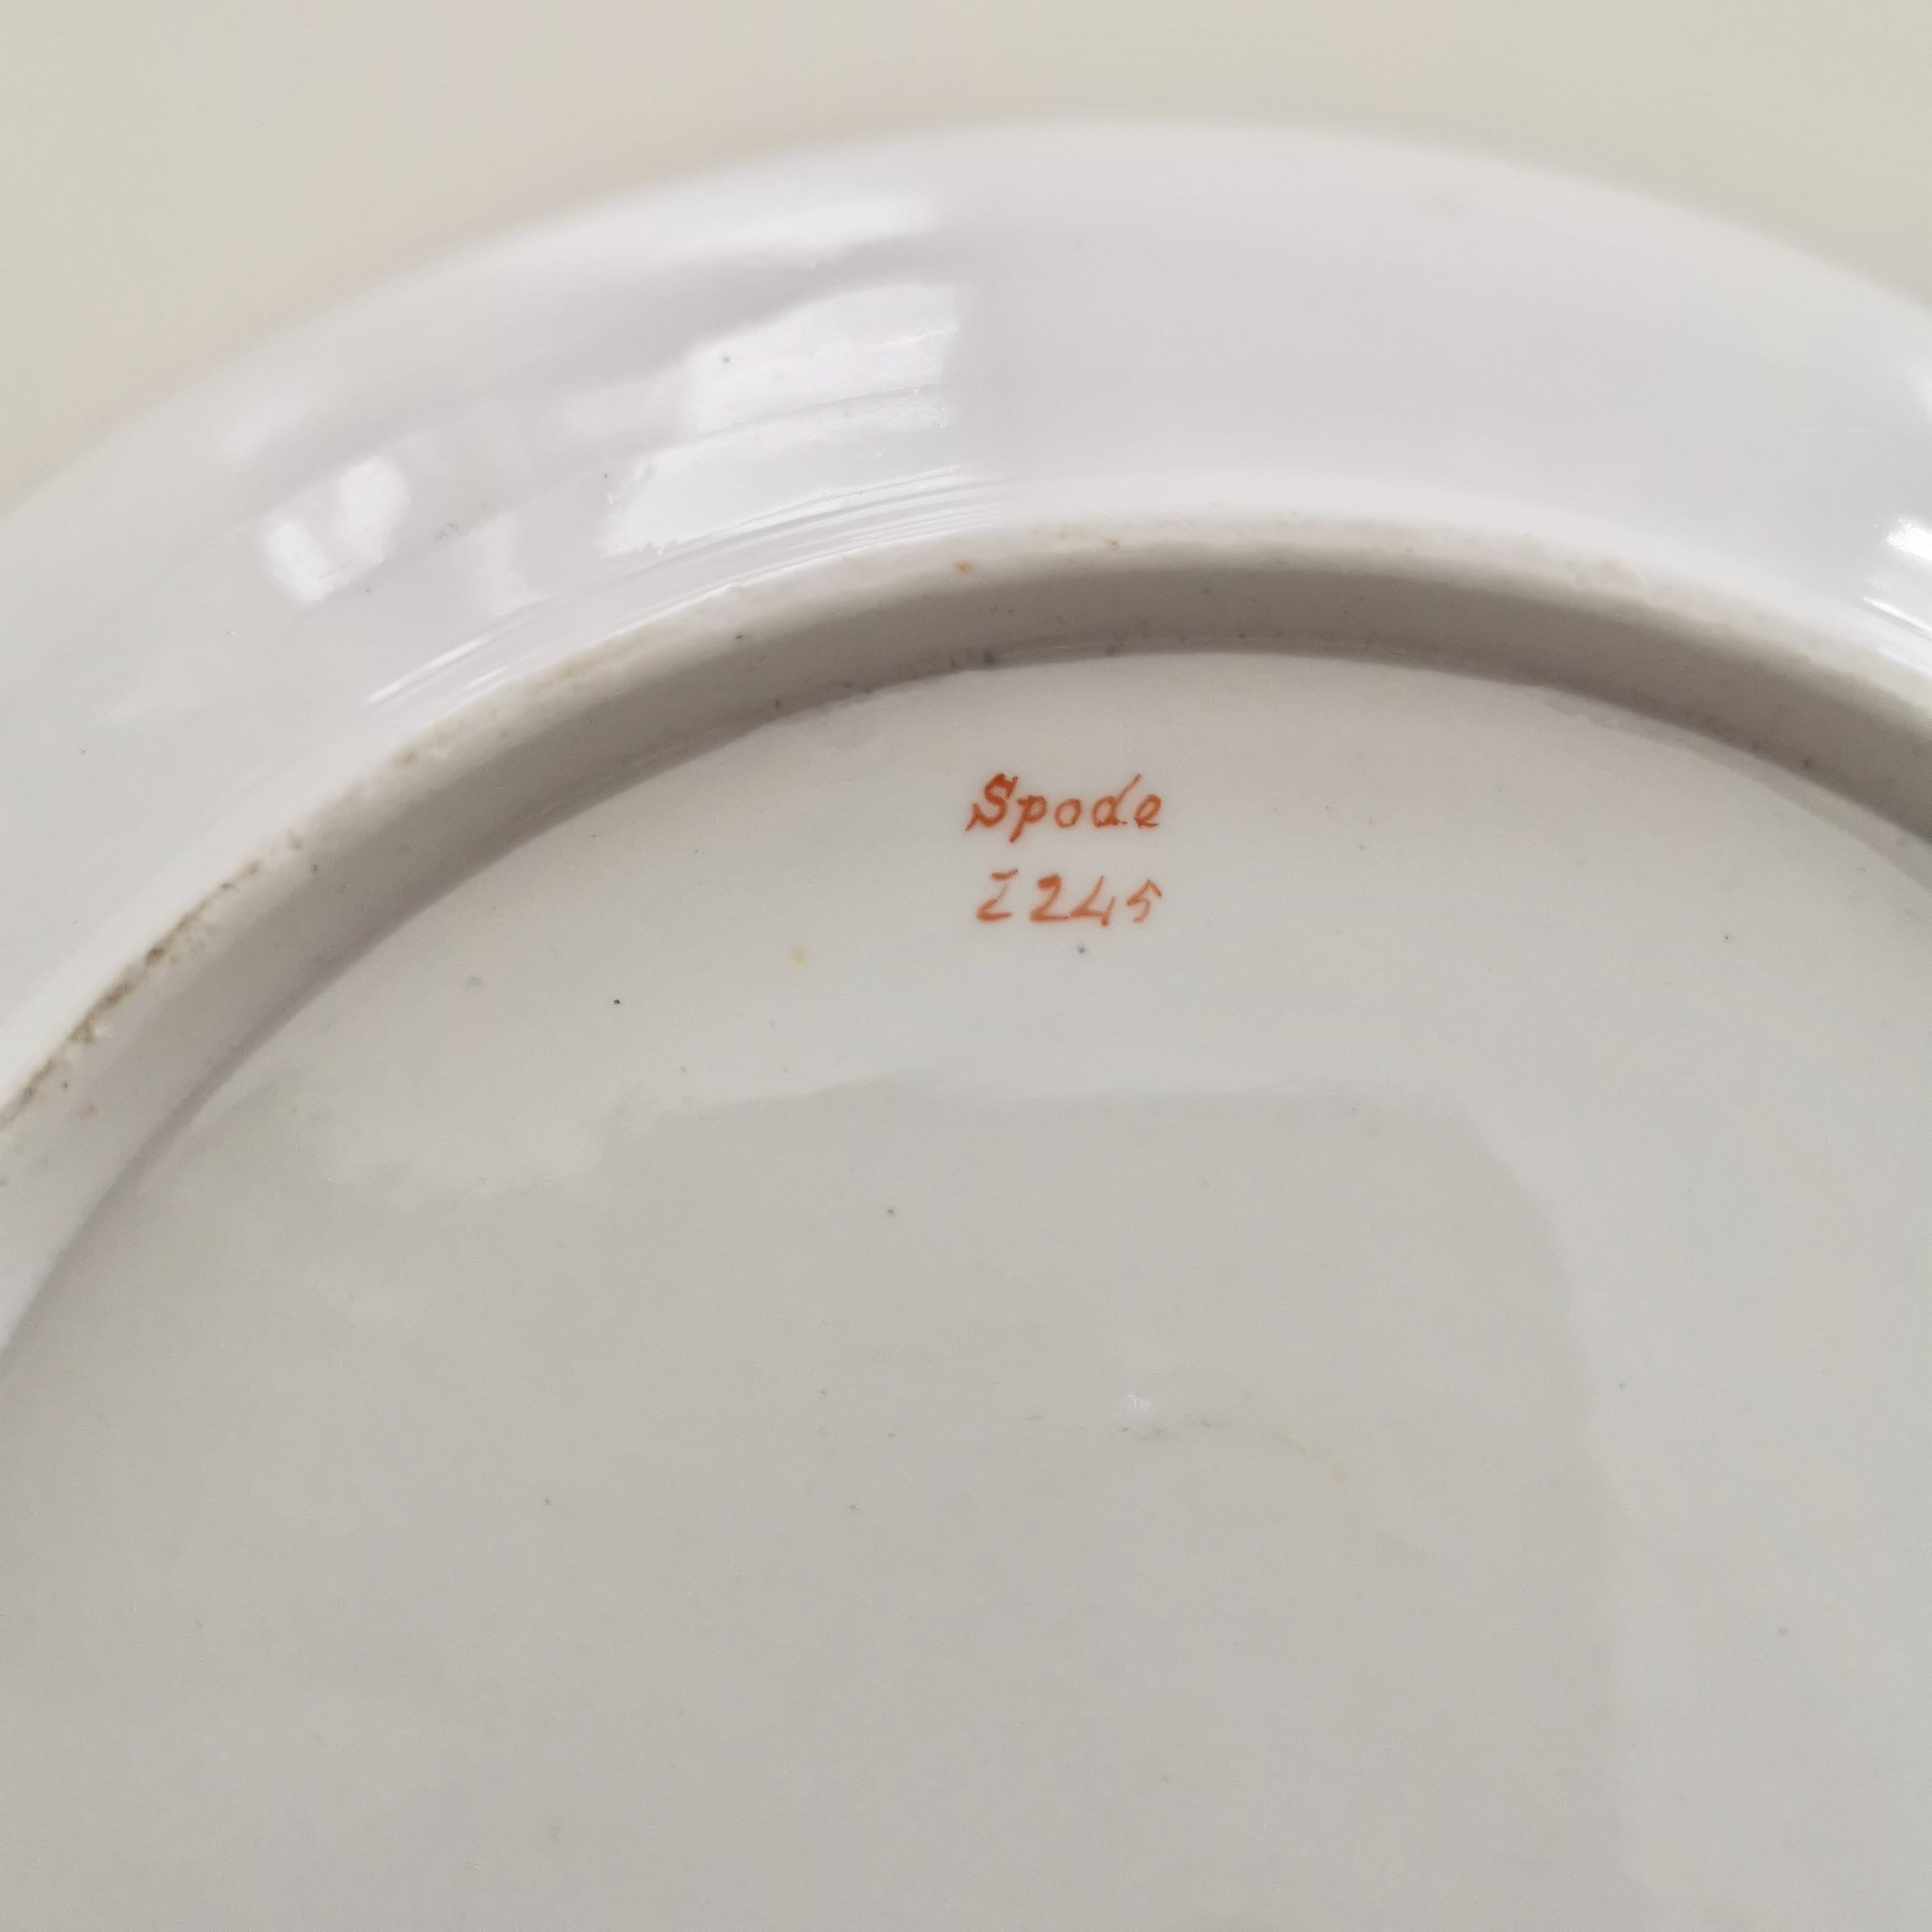 Spode Deep Porcelain Plate, Periwinkle Blue with Orange Flowers, ca 1815 2